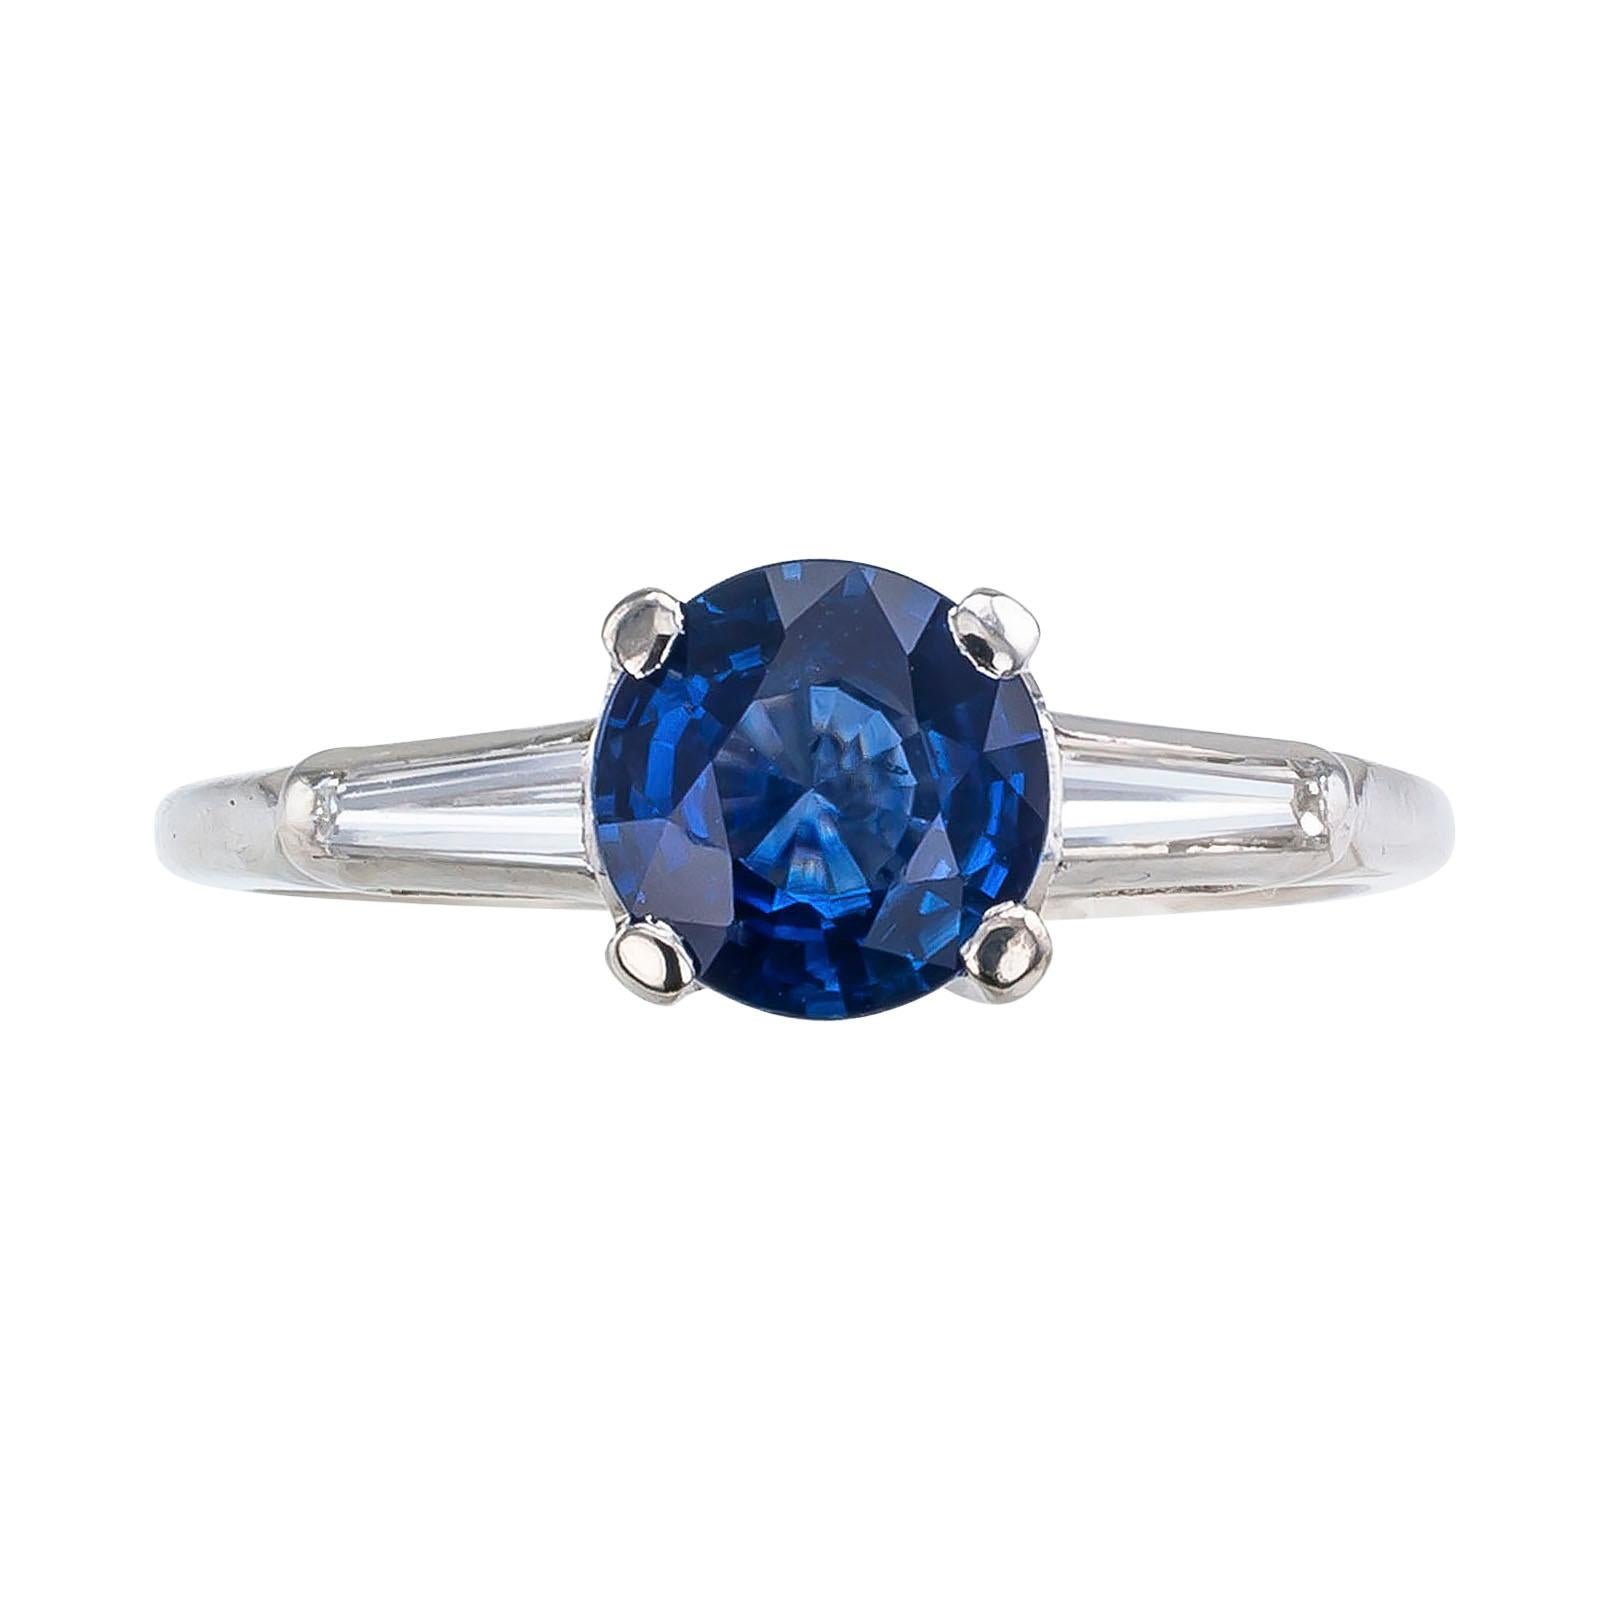 Sapphire and diamond platinum engagement ring circa 1950.

DETAILS:
GEMSTONES: one round, faceted blue sapphire weighing approximately 1.11 carats.

DIAMONDS: two tapered baguettes totaling approximately 0.20 carat, approximately H color and VS